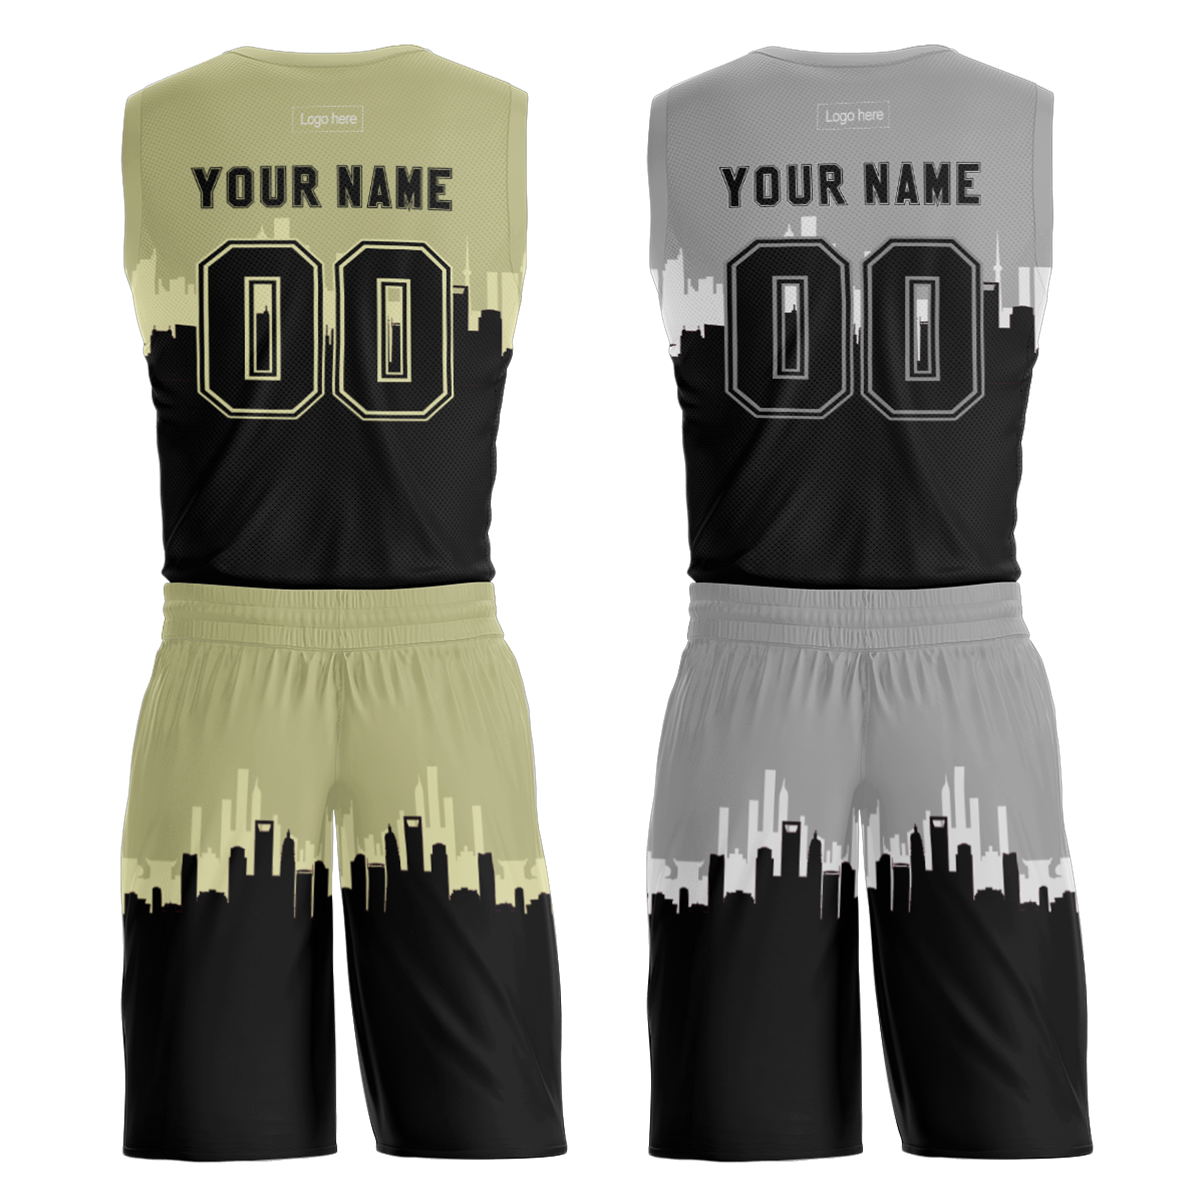 Customized Sublimation Printing Basketball Uniforms Design Competitive Basketball Team Jerseys